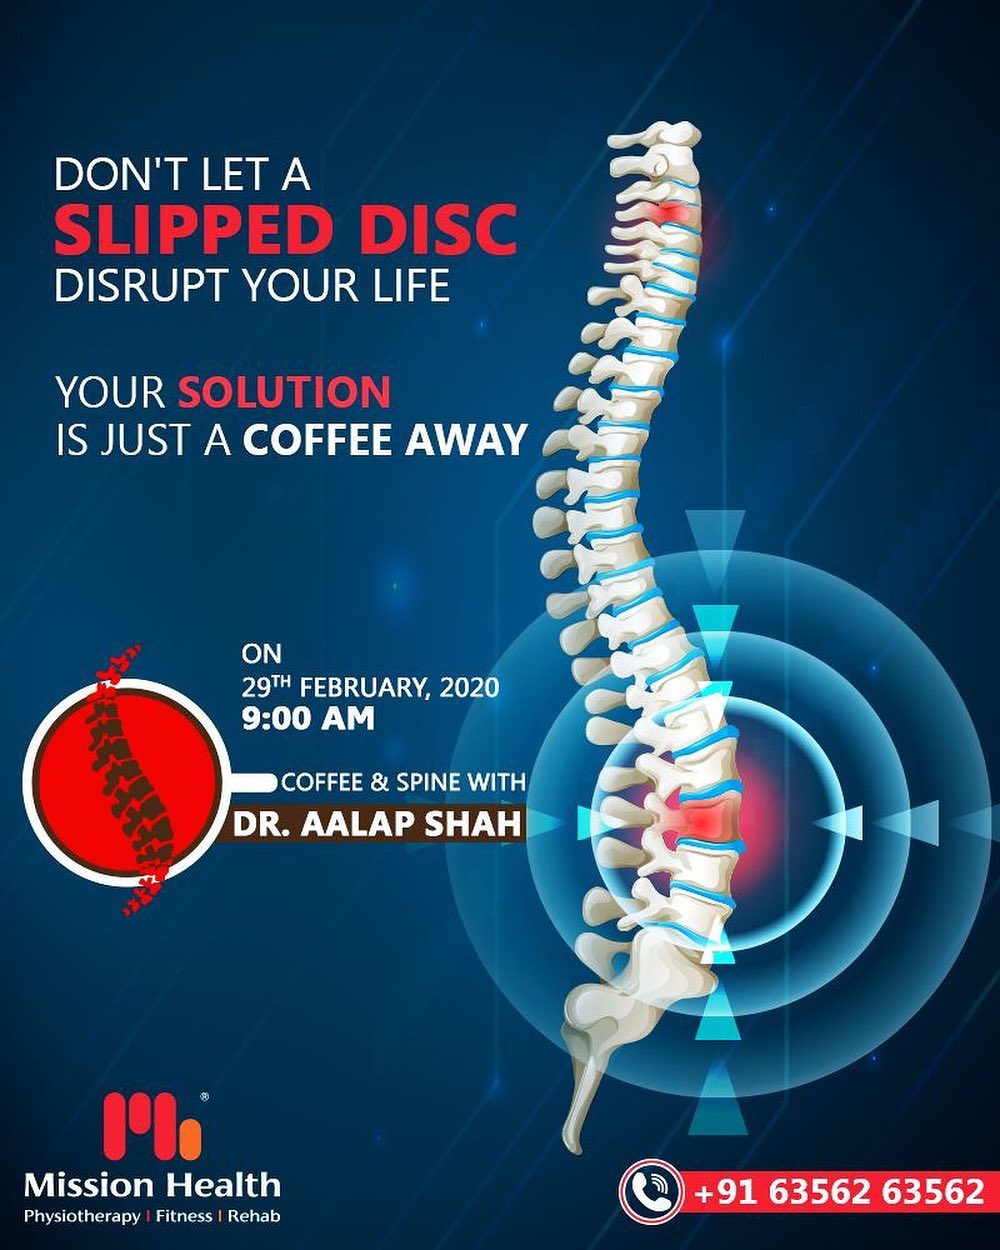 Slipped disc can be painful and life-altering get rid of affliction and get your life back on track.

Keep reading this space for more Updates

Call: +916356263562

Visit: www.missionhealth.co.in

#CoffeeAndSpineWithDrAalapShah #DrAalapShah #SuperSpecialitySpineClinic #SpineClinic #BackPain #NeckPain #SlippedDisc #MissionHealth #MissionHealthIndia #AbilityClinic #MovementIsLife